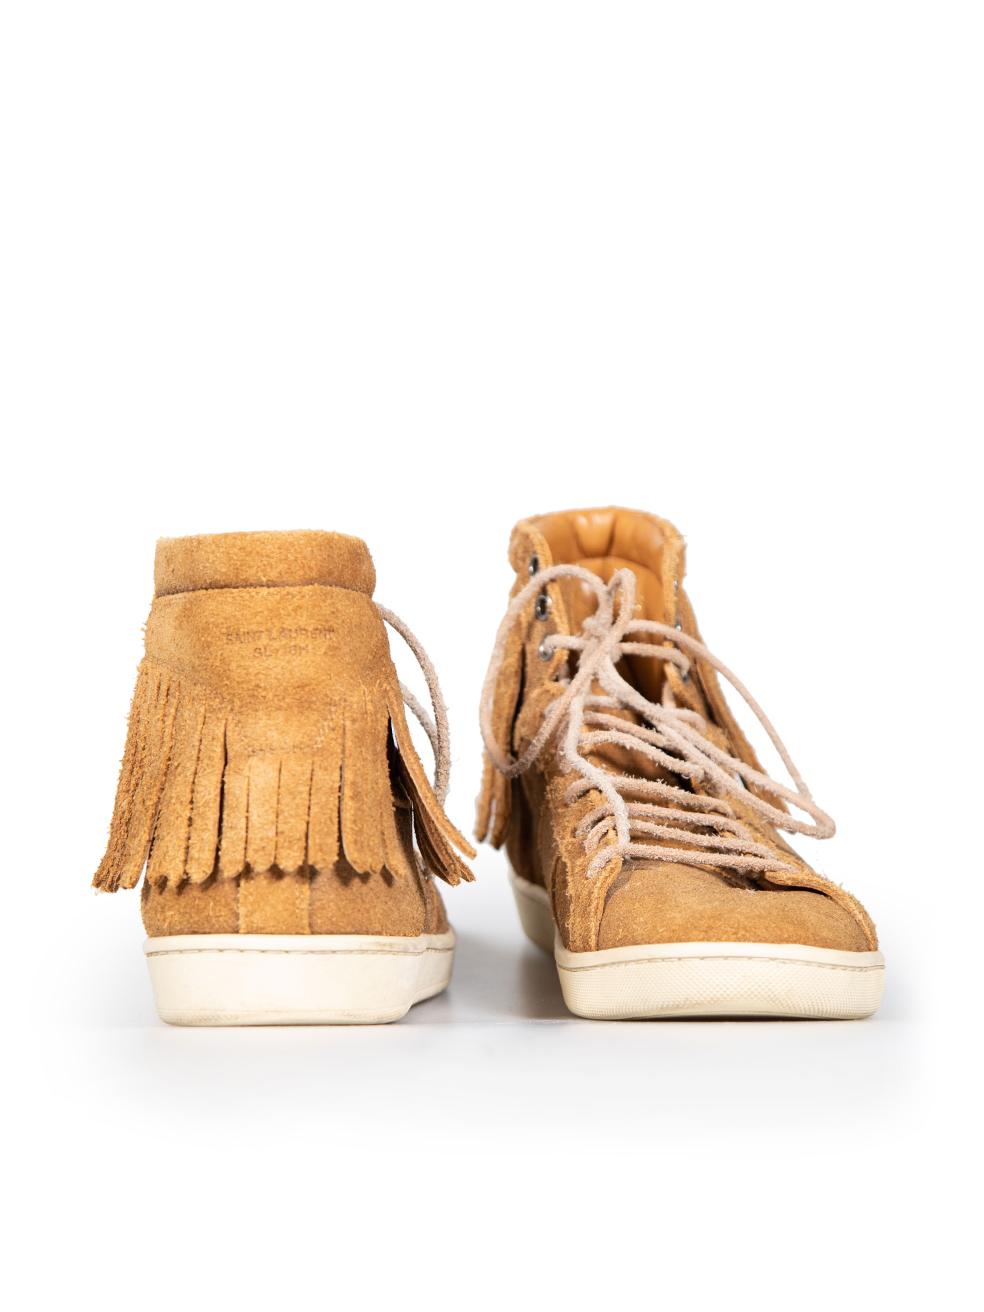 Saint Laurent Brown Suede High-Top Fringe Trainers Size IT 39 In Good Condition For Sale In London, GB